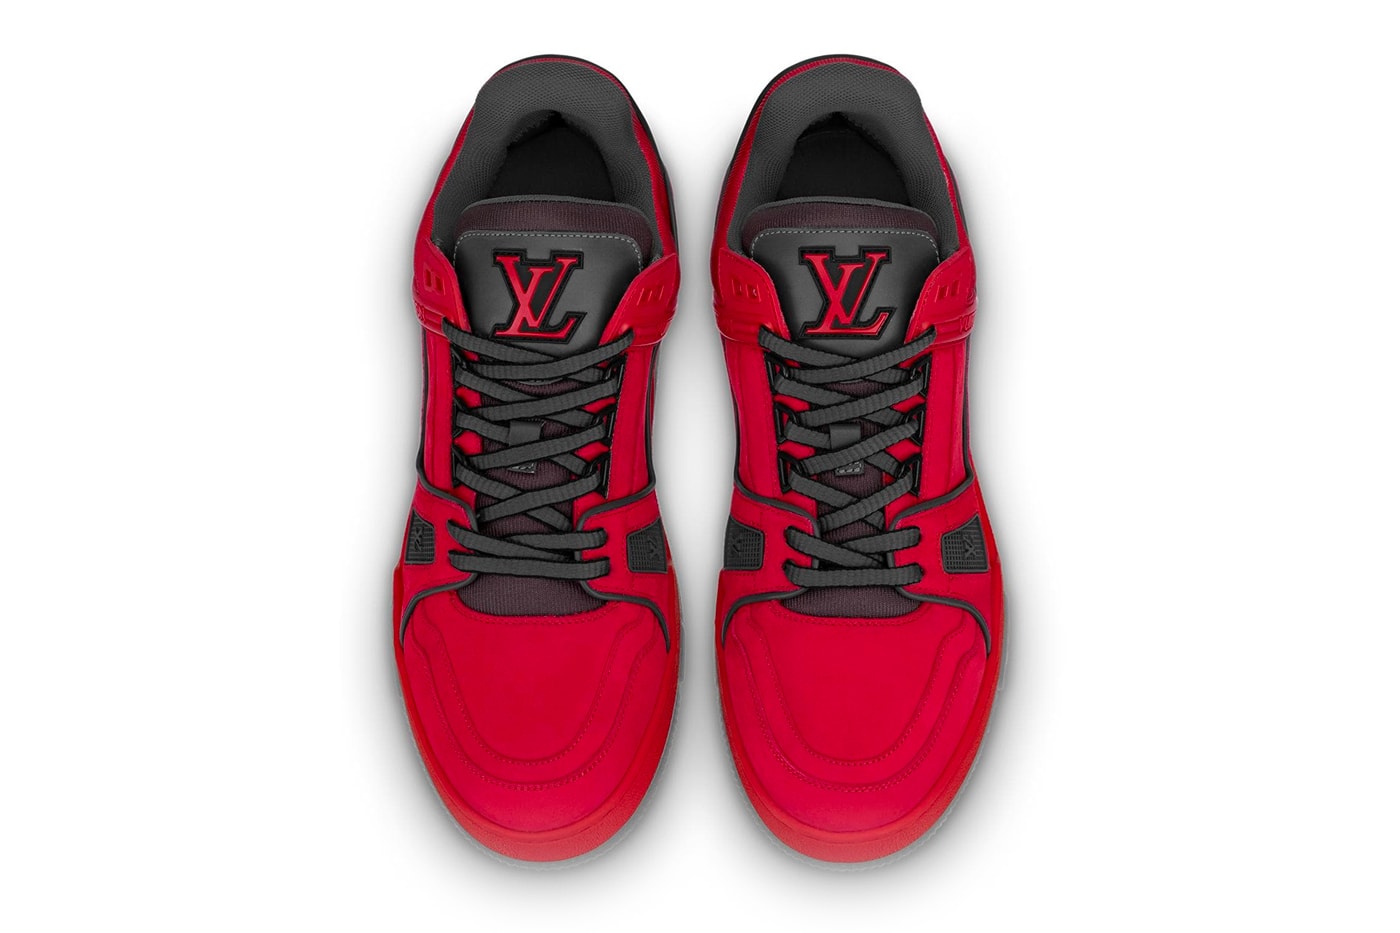 Louis Vuitton Drops Two Versions of LV 408 Sneakers rouge noir suede flannel calf leather low-top virgil abloh fall/winter 2019 buy now price release info 